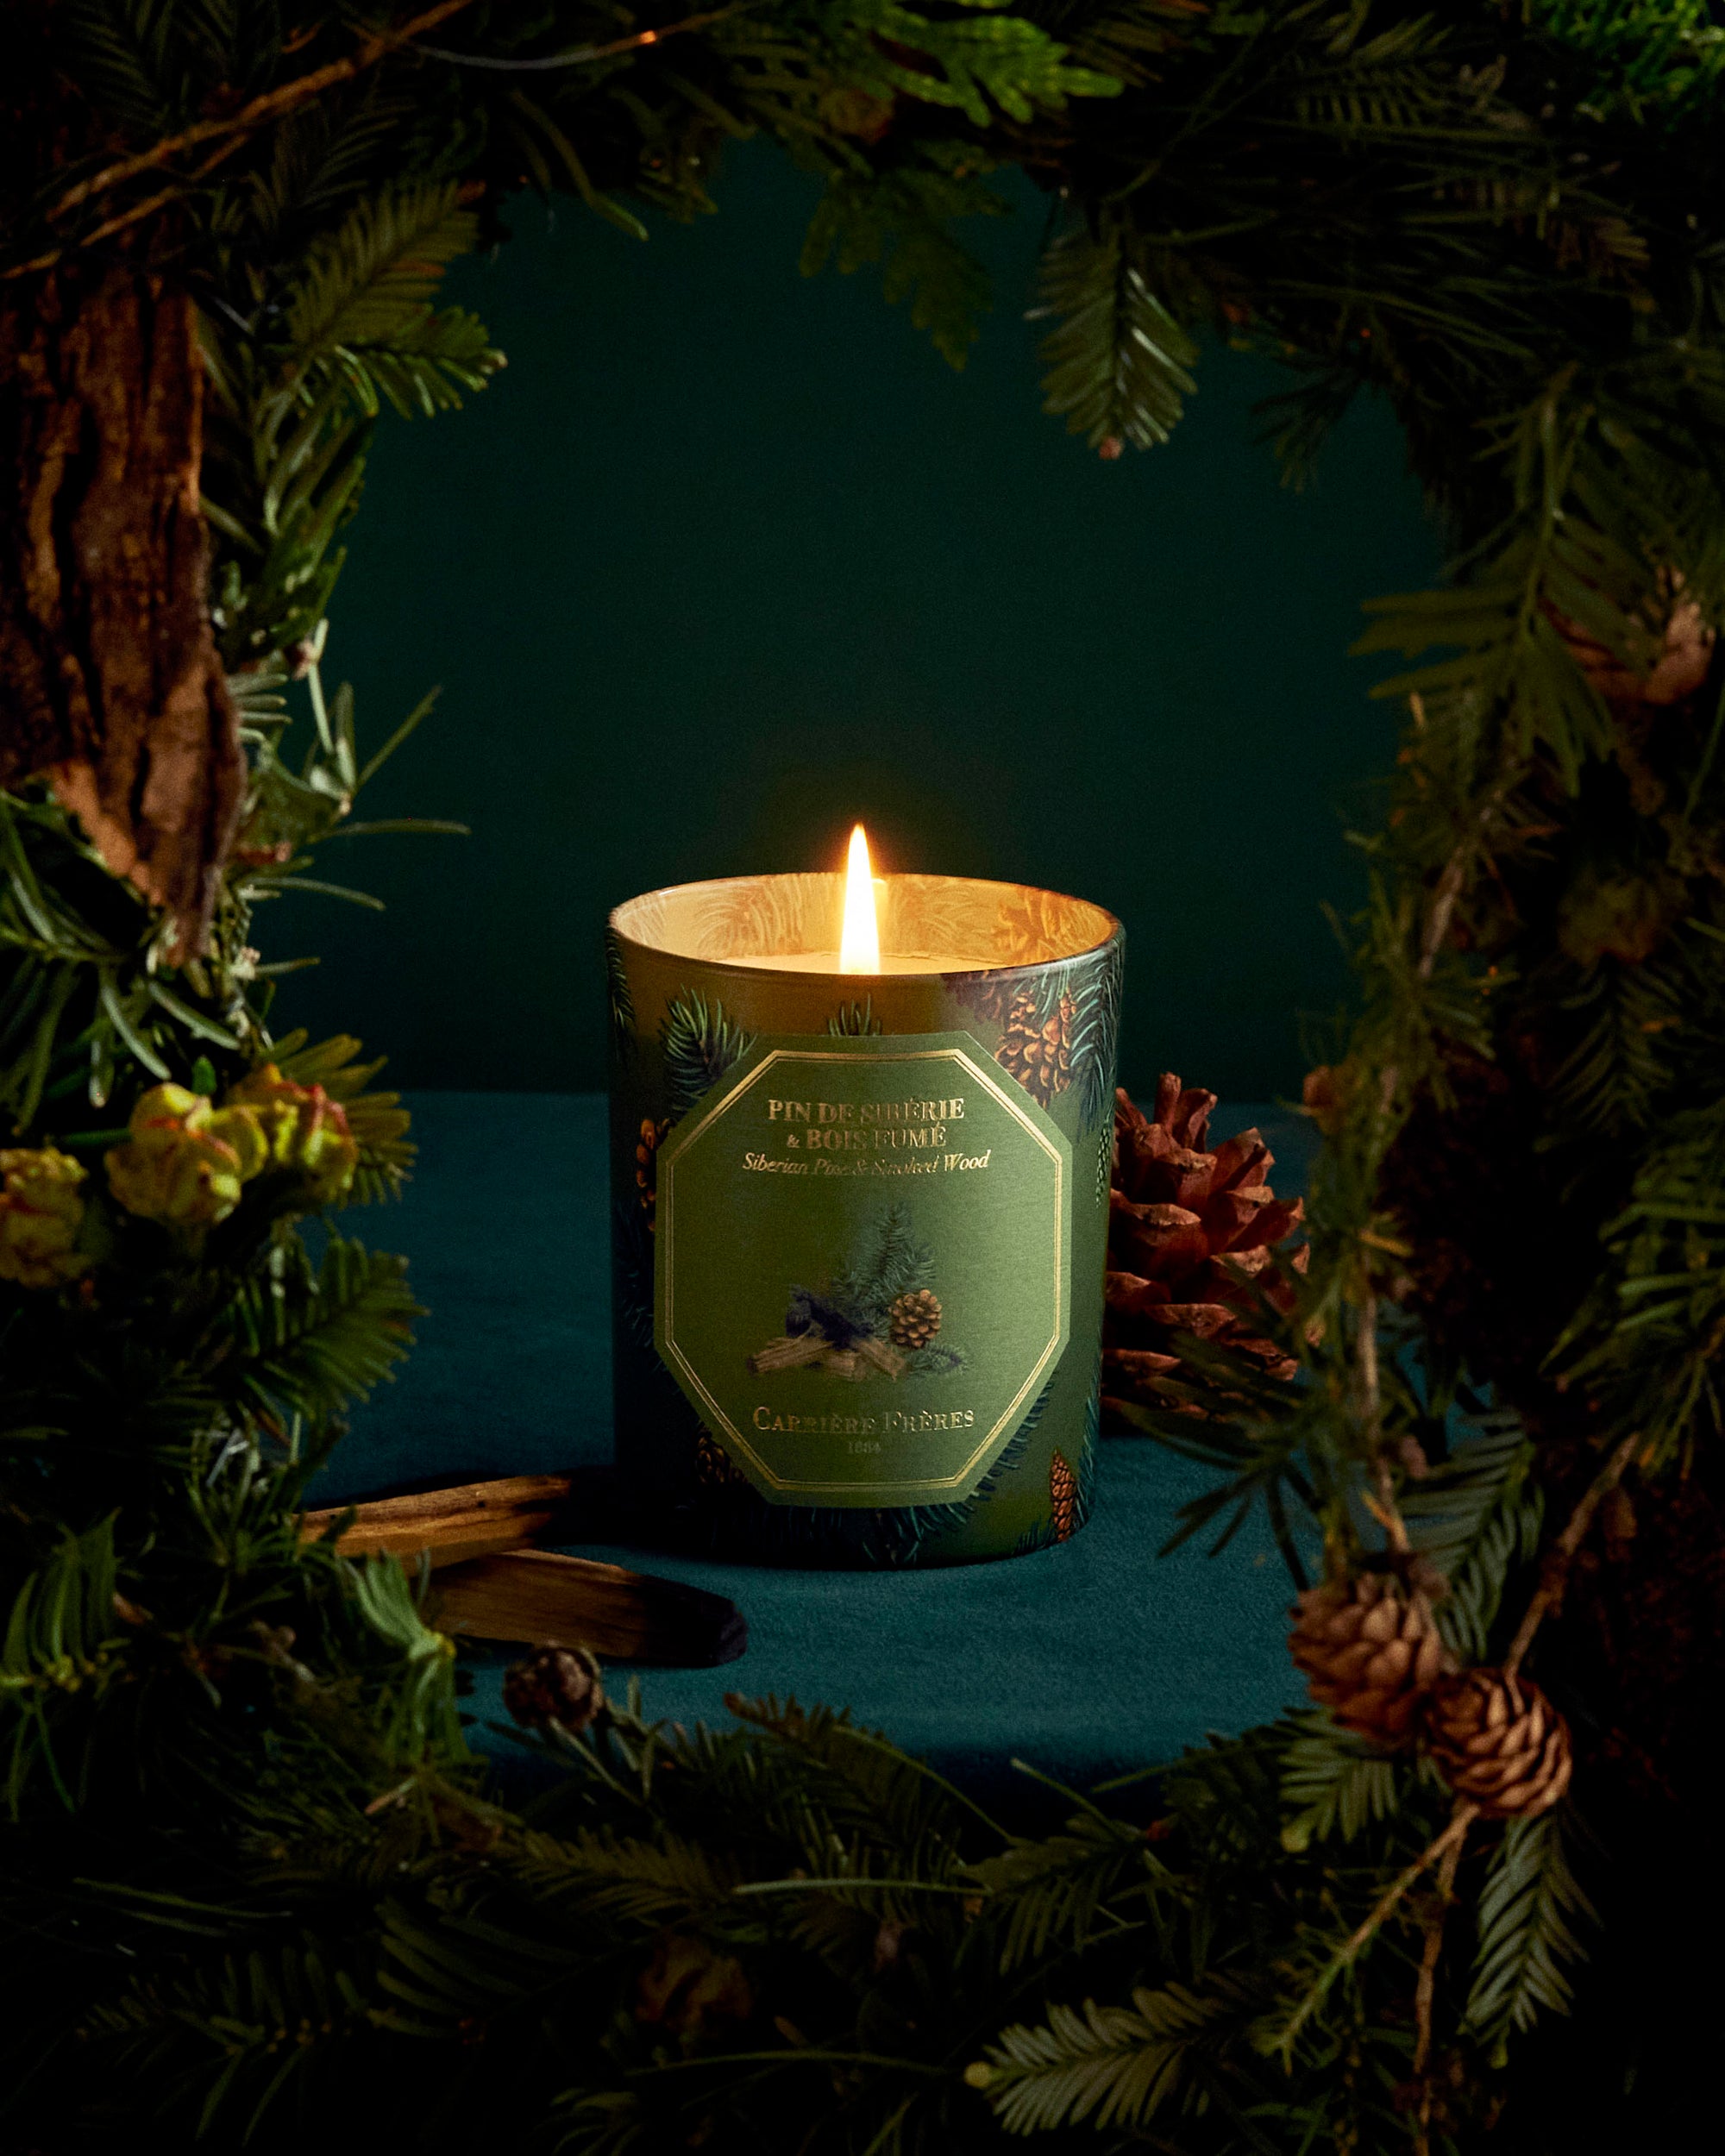 Carriere Freres Siberian Pine and Smoked Wood Holiday Candle